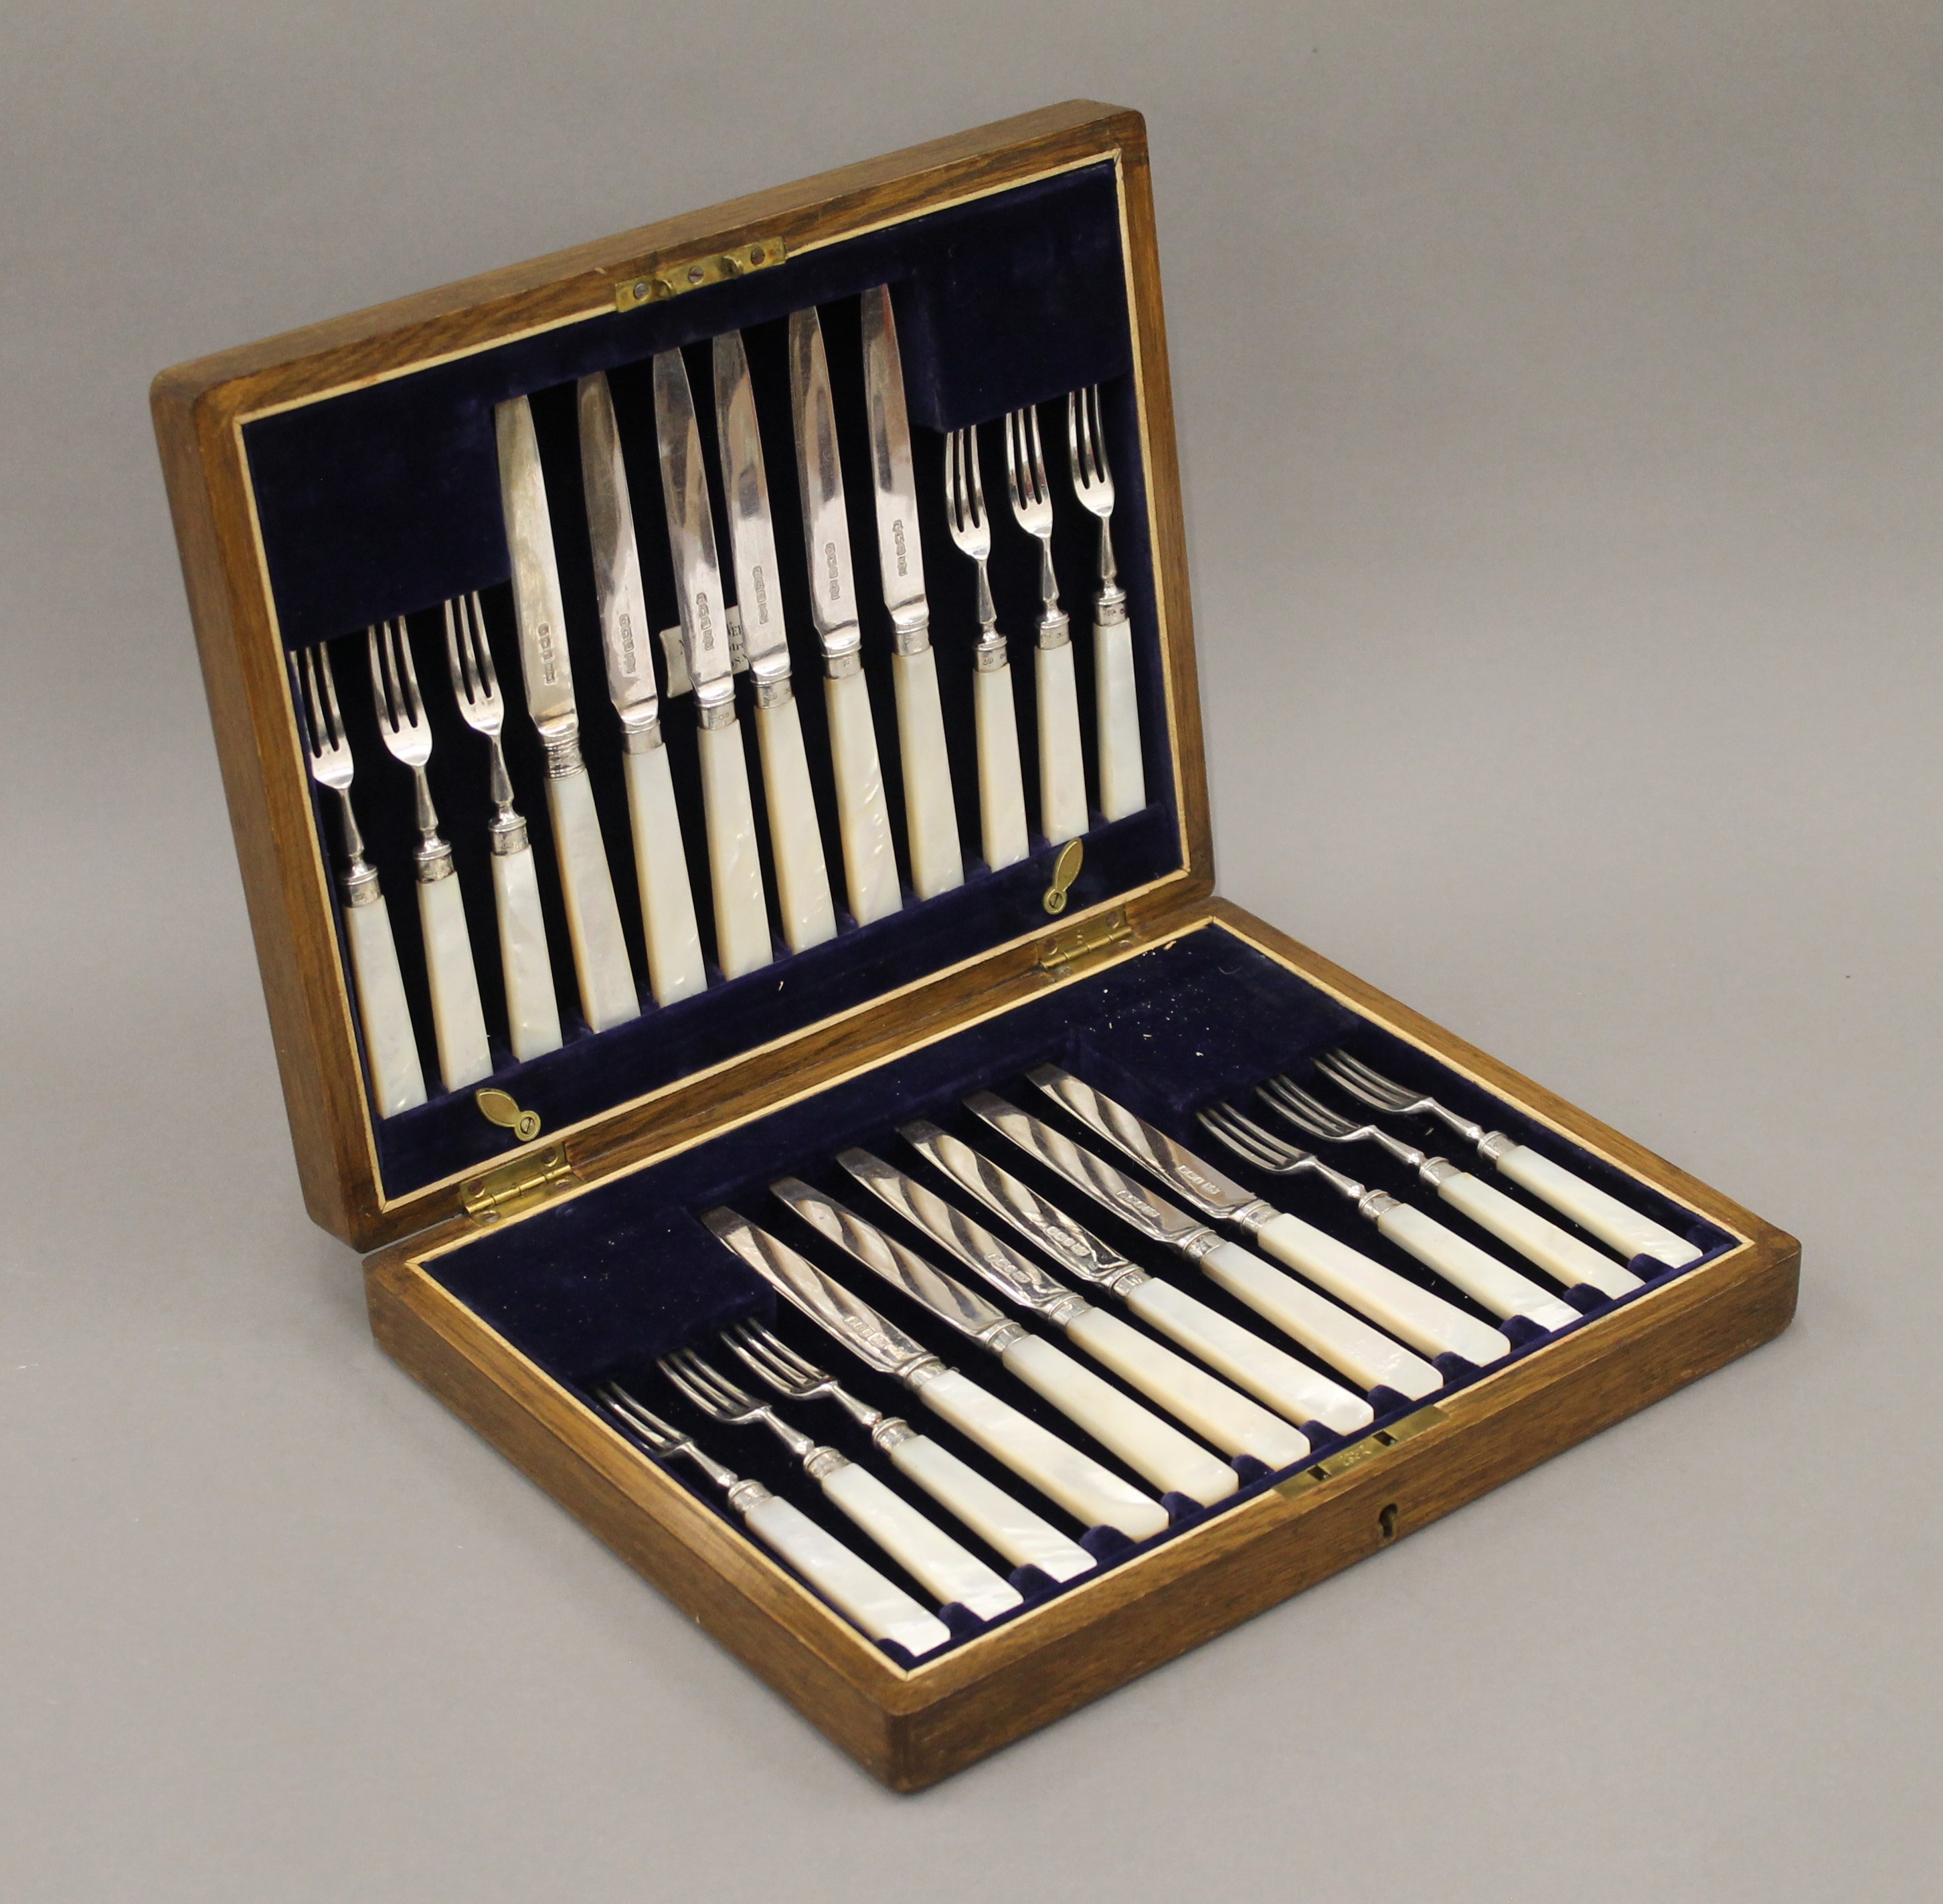 A cased set of mother-of-pearl and silver knives and forks.